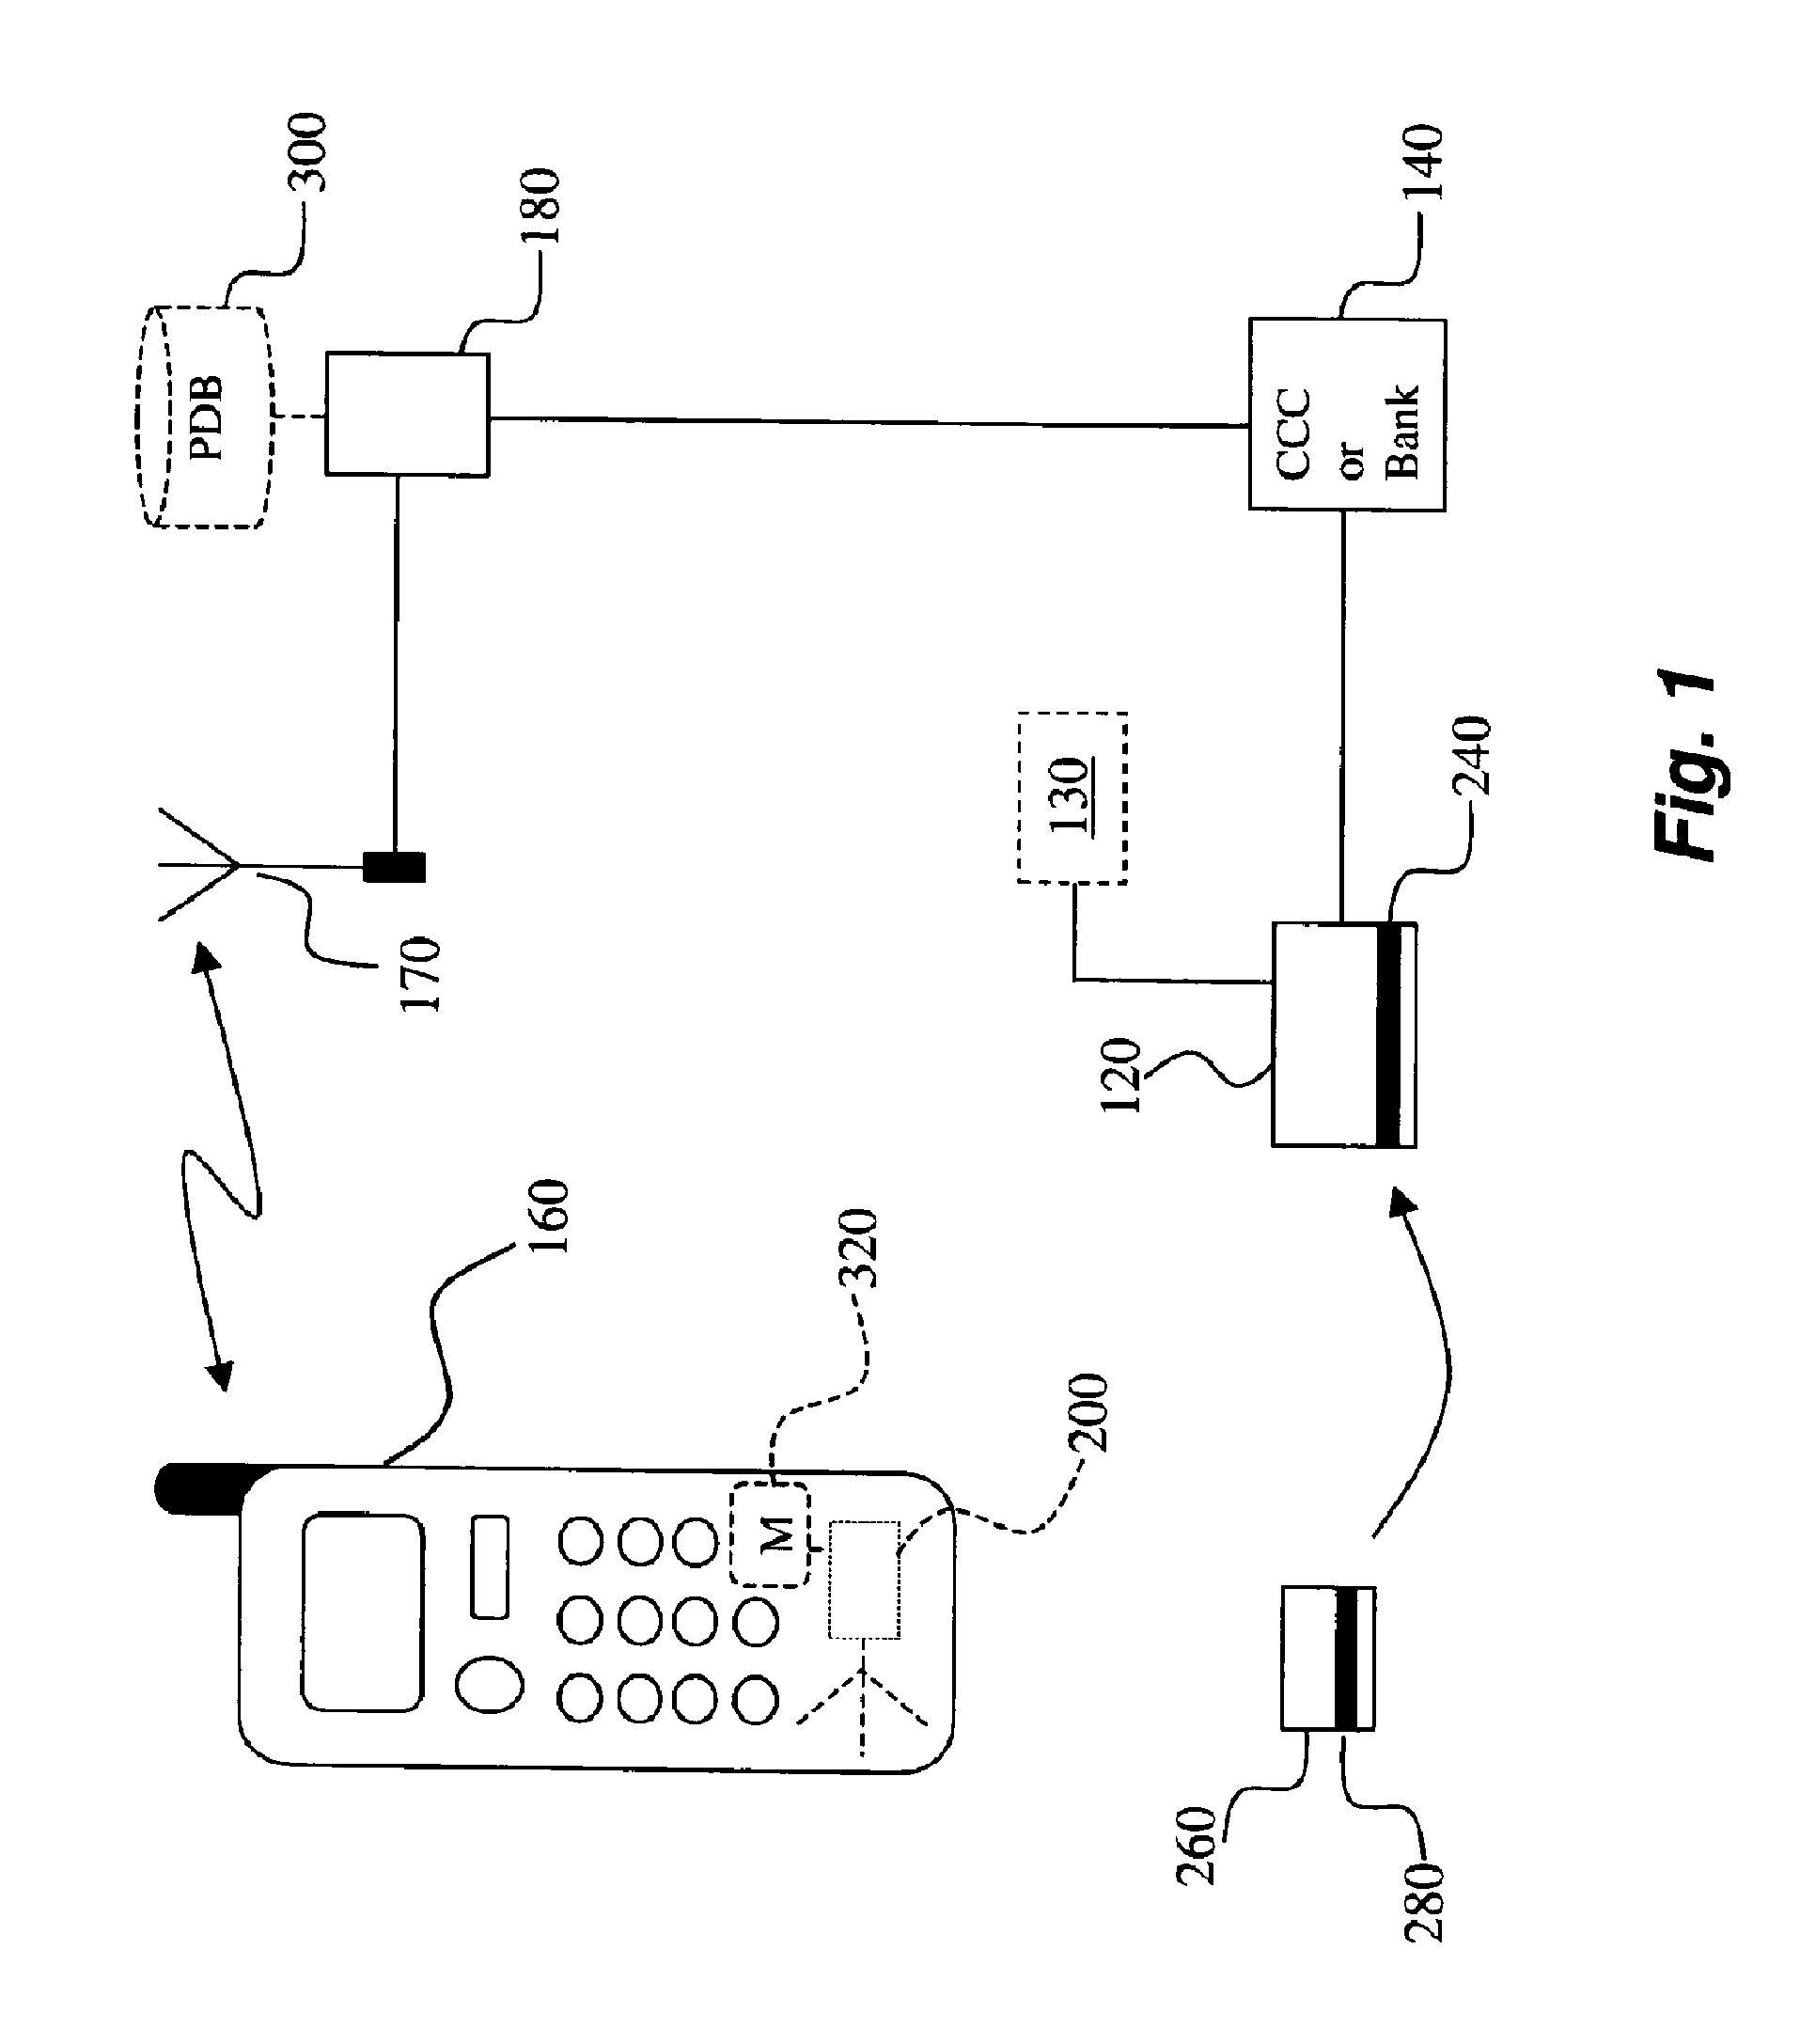 Method for identifying the georgrapic location of a router